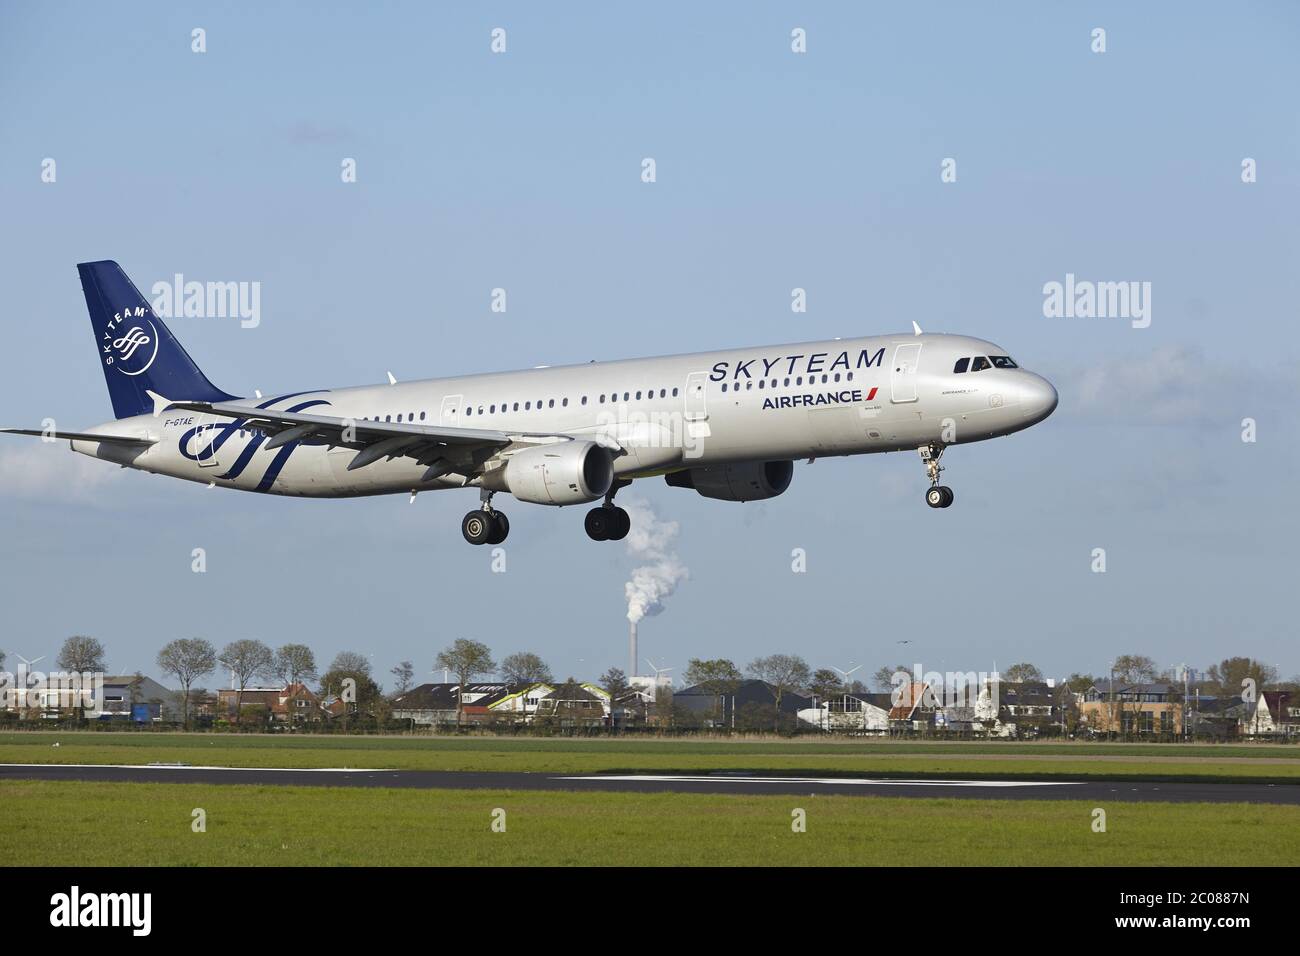 Amsterdam Schiphol Airport - A321 from Air France (Skyteam Livery) lands Stock Photo